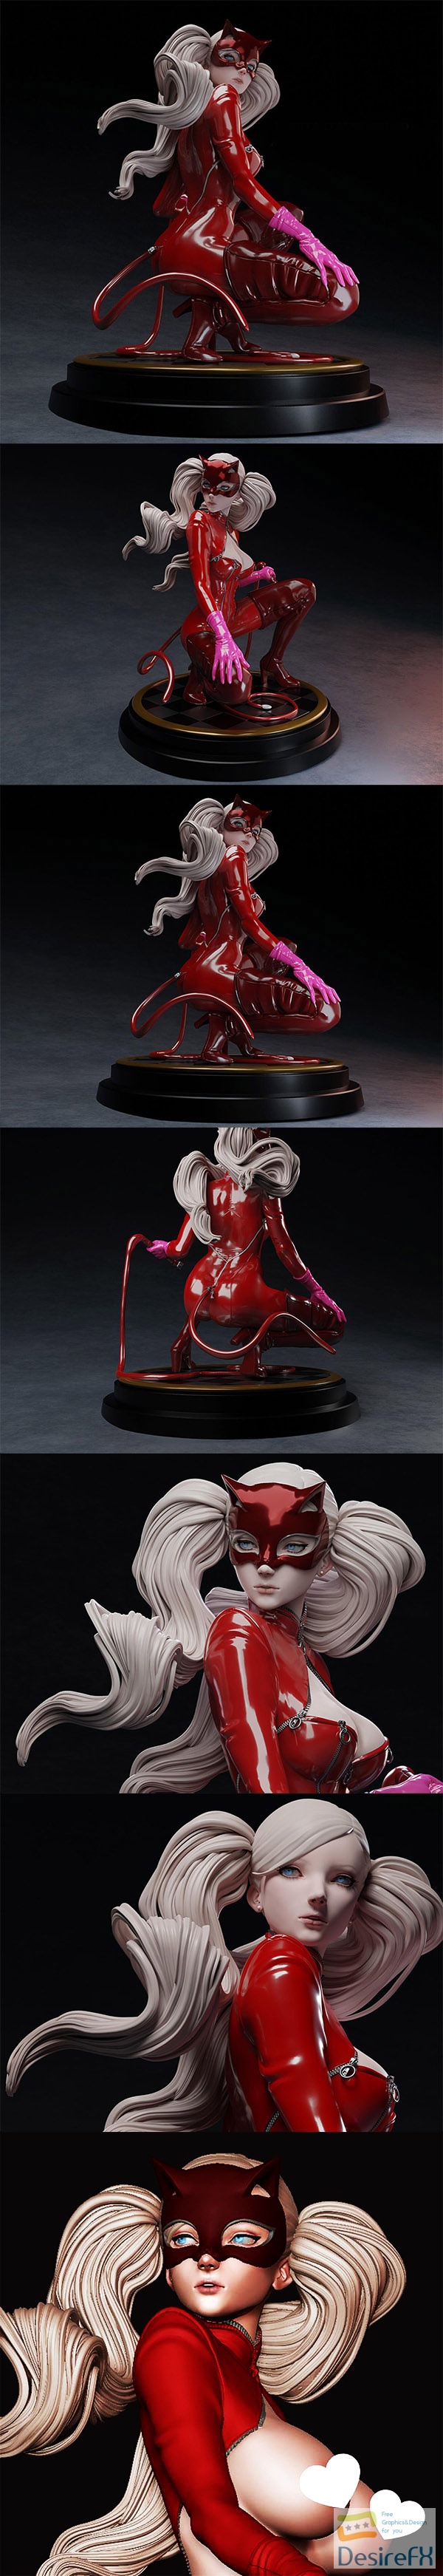 Nympha – Ann Takamaki from Persona 5 – 3D Print